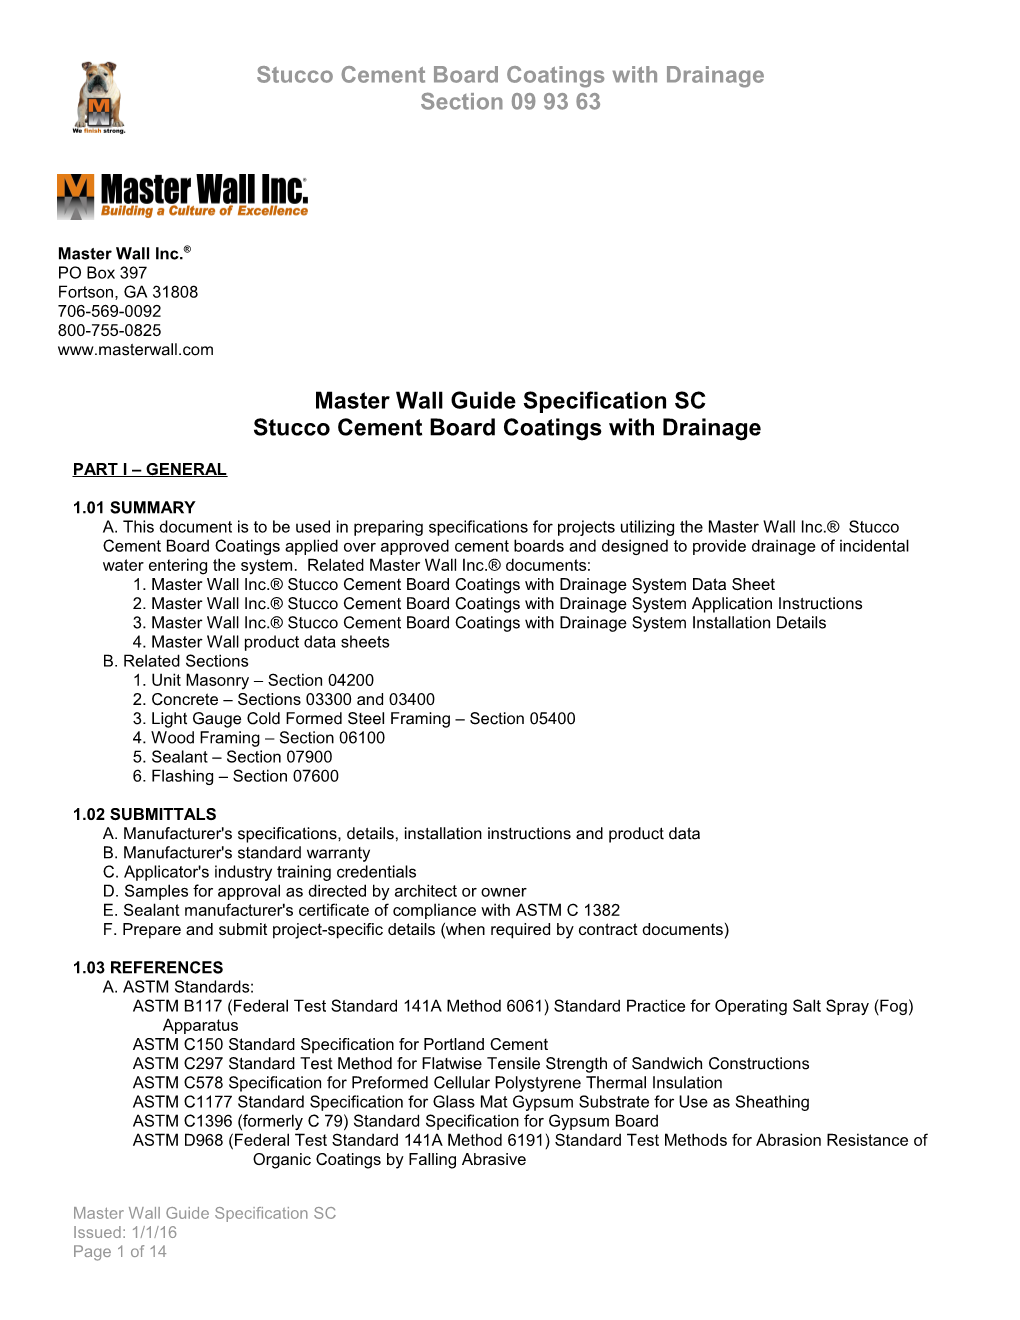 Master Wall Guide Specification SC